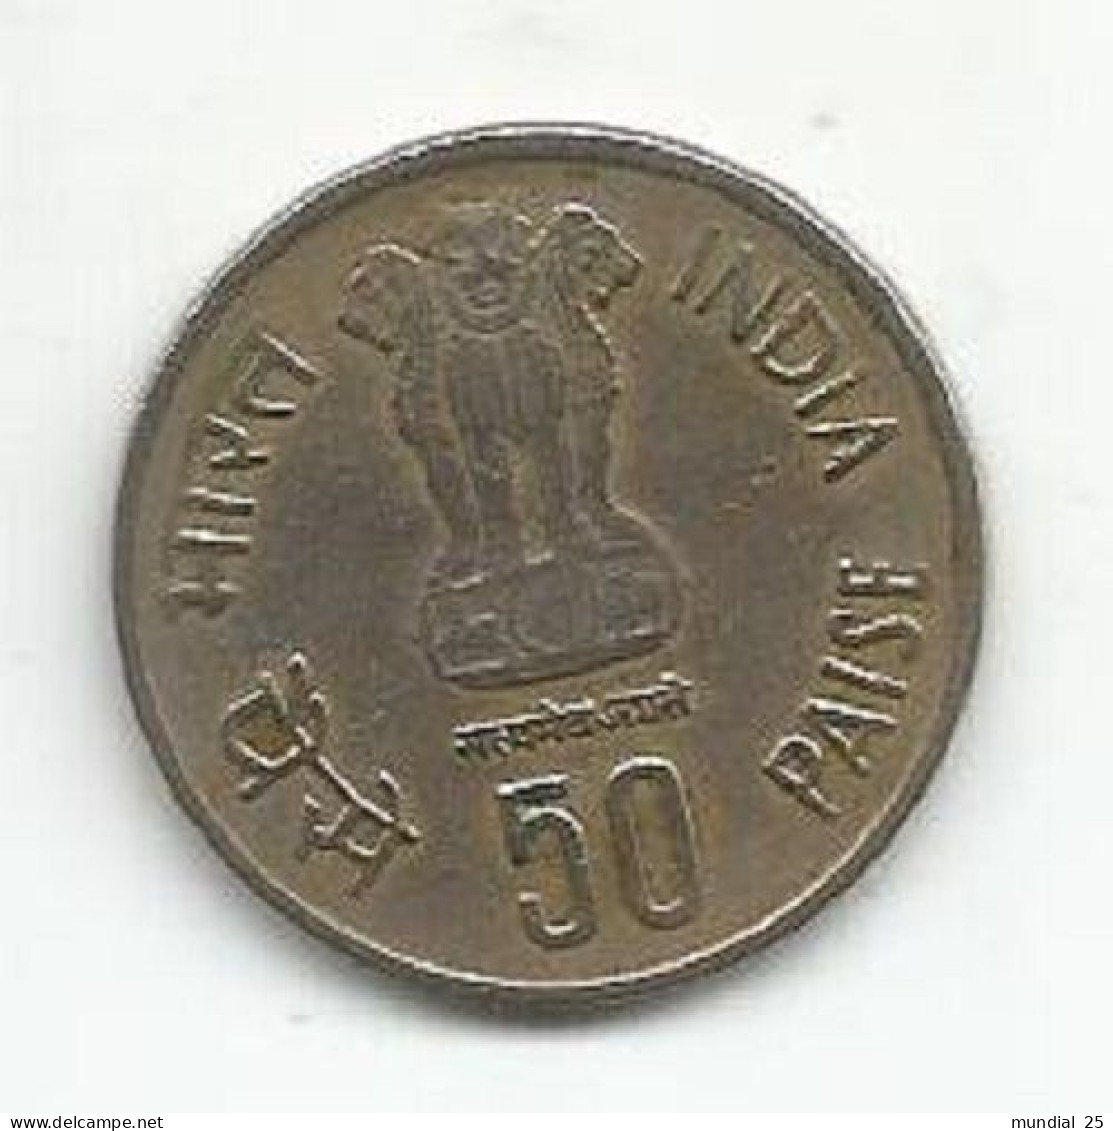 INDIA 50 PAISE N/D (1985) - GOLDEN JUBILEE OF RESERVE BANK OF INDIA - Indien